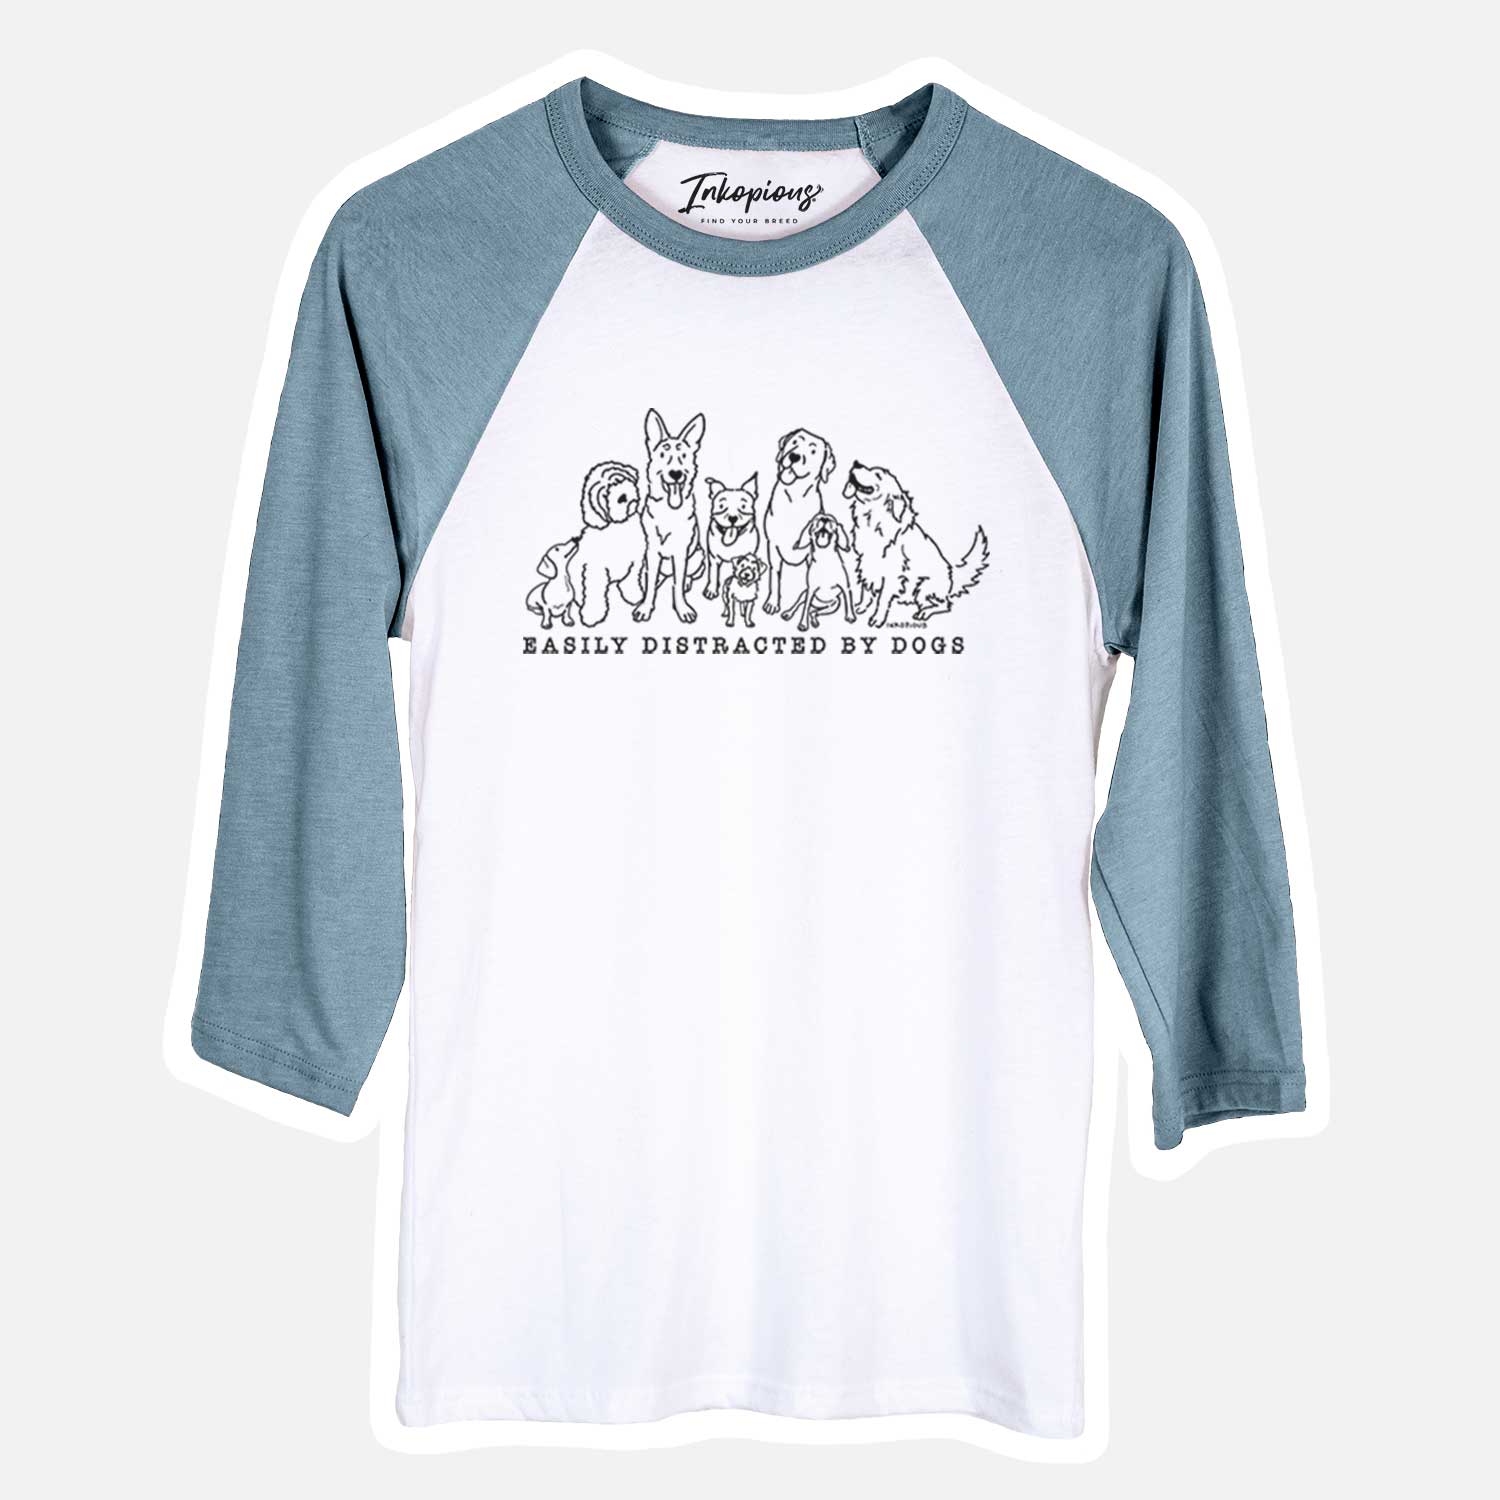 LAST CHANCE – Distracted by Dogs - 3/4 Long Sleeve